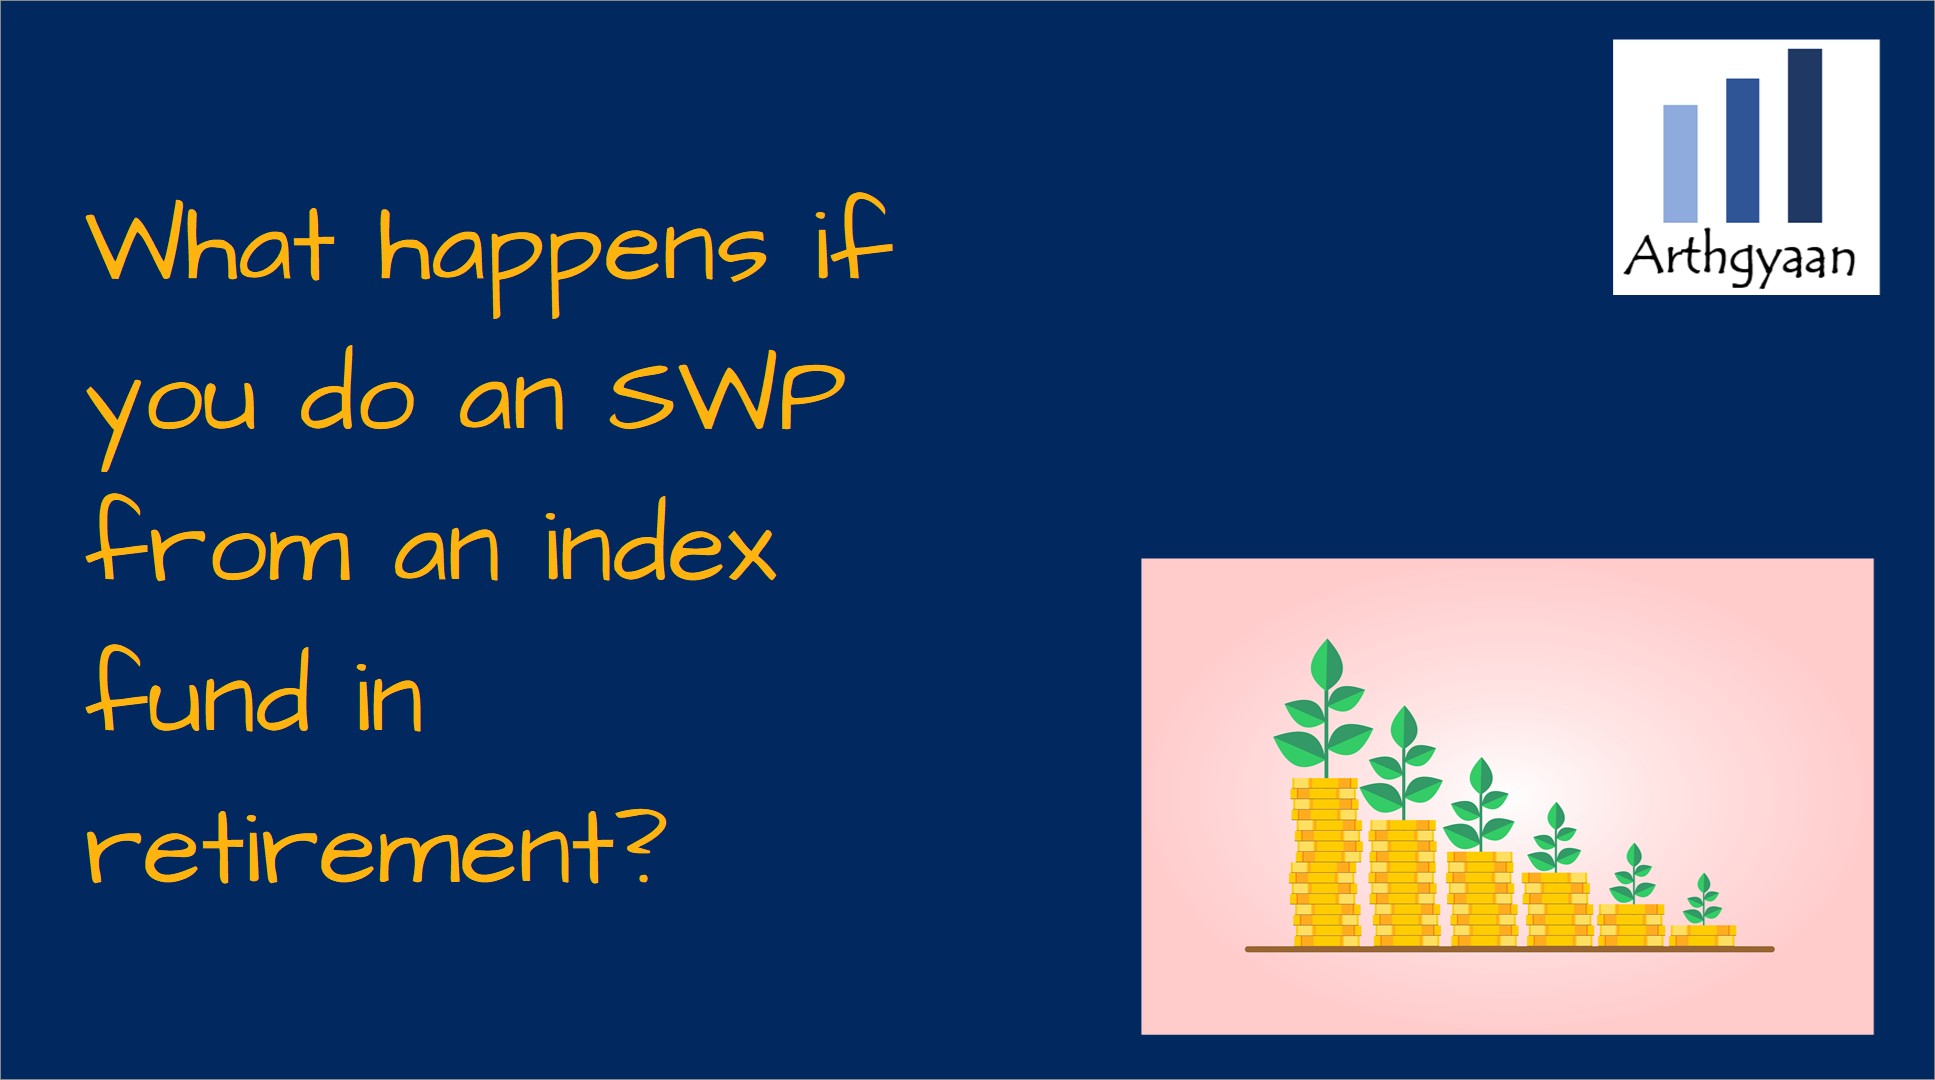 <p>We examine the results of running a long-term SWP in index funds for retirement.</p>

